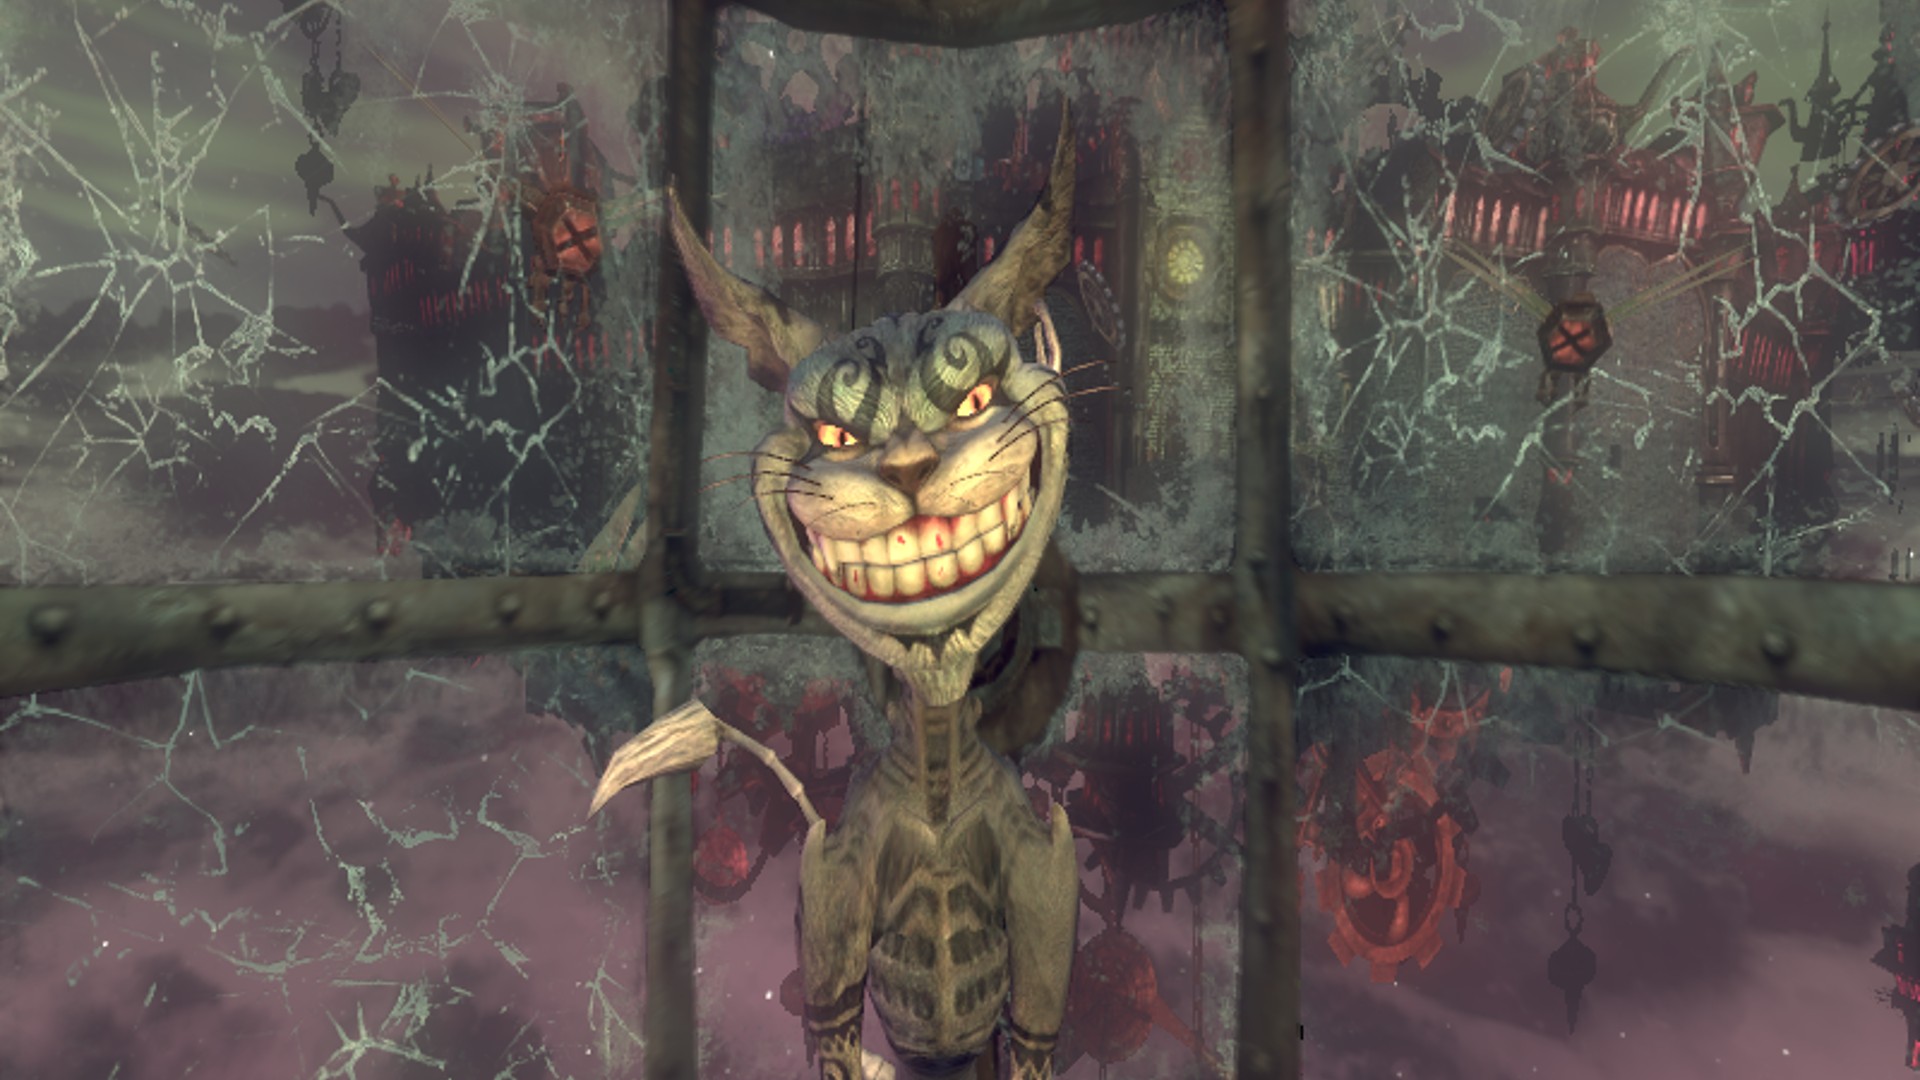 Which Character From Alice: Madness Returns Are You?